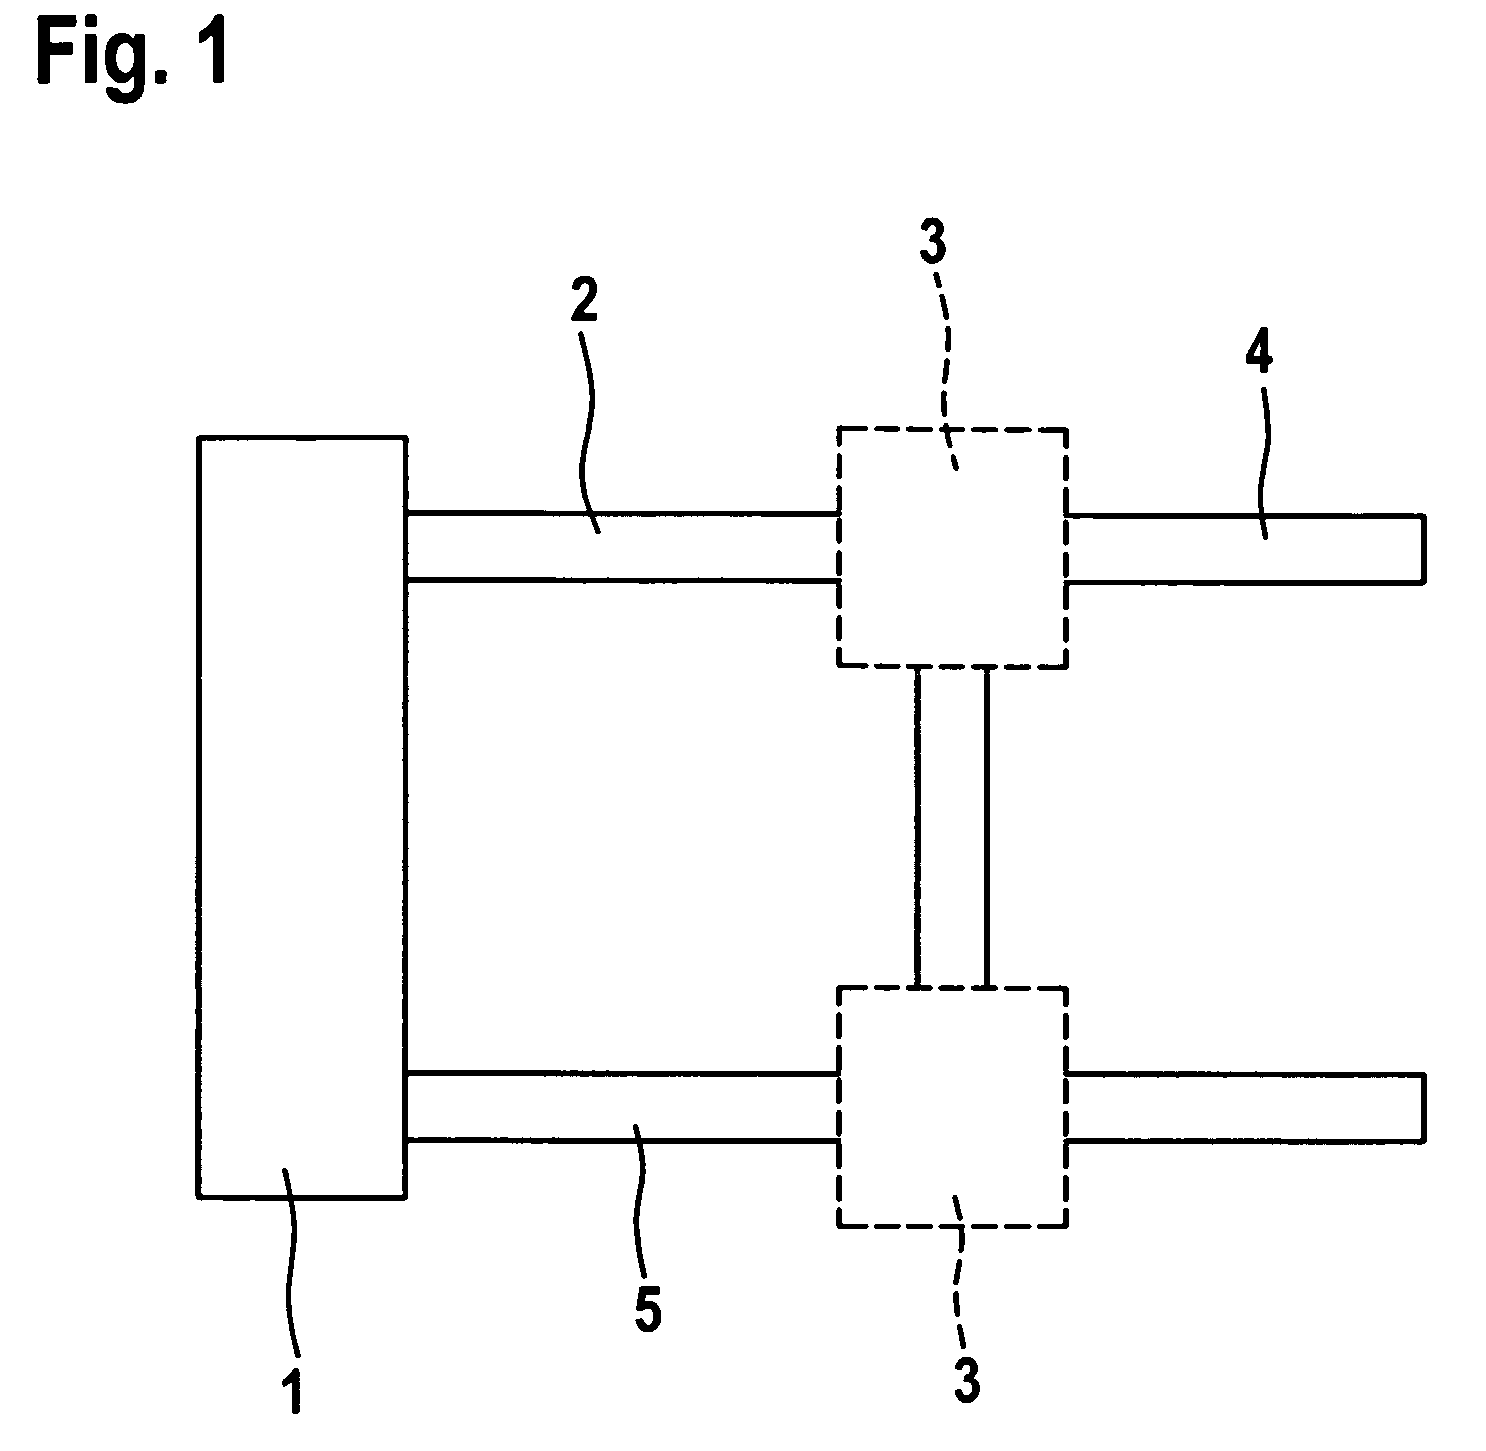 Method for determining the exhaust gas temperature of an internal combustion engine